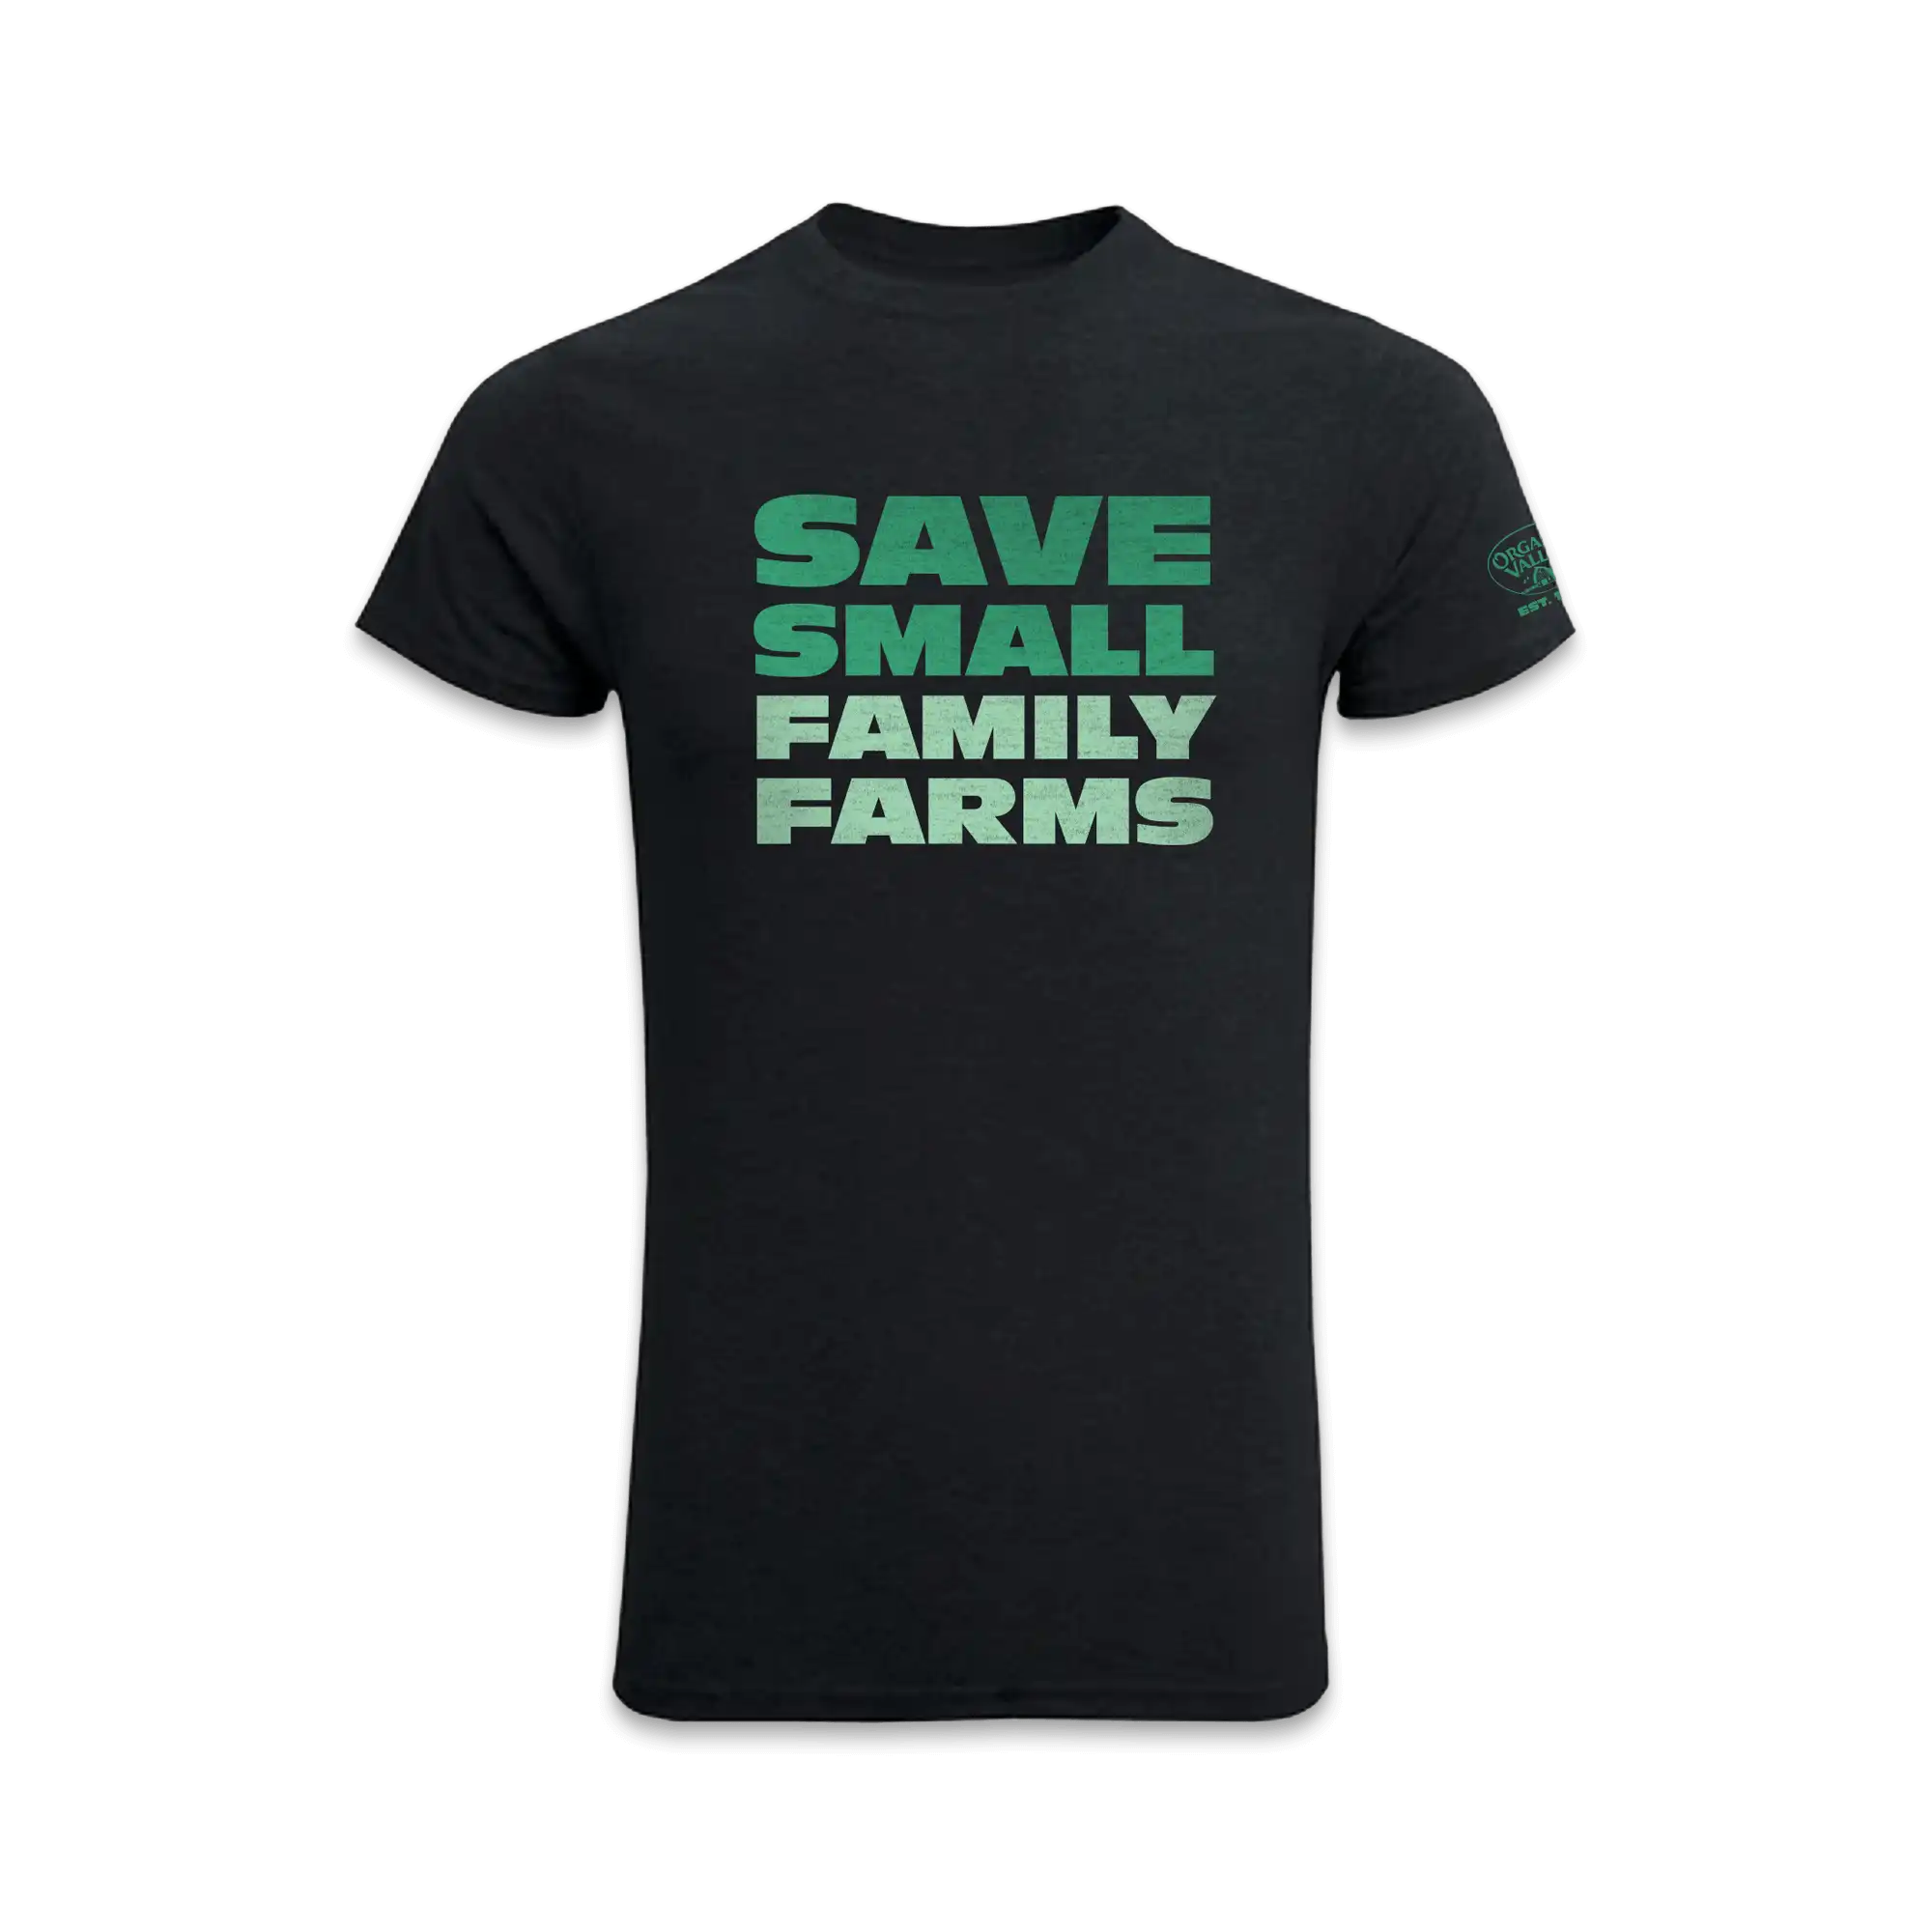 Visit the Save Small Family Farms Tee Product Page